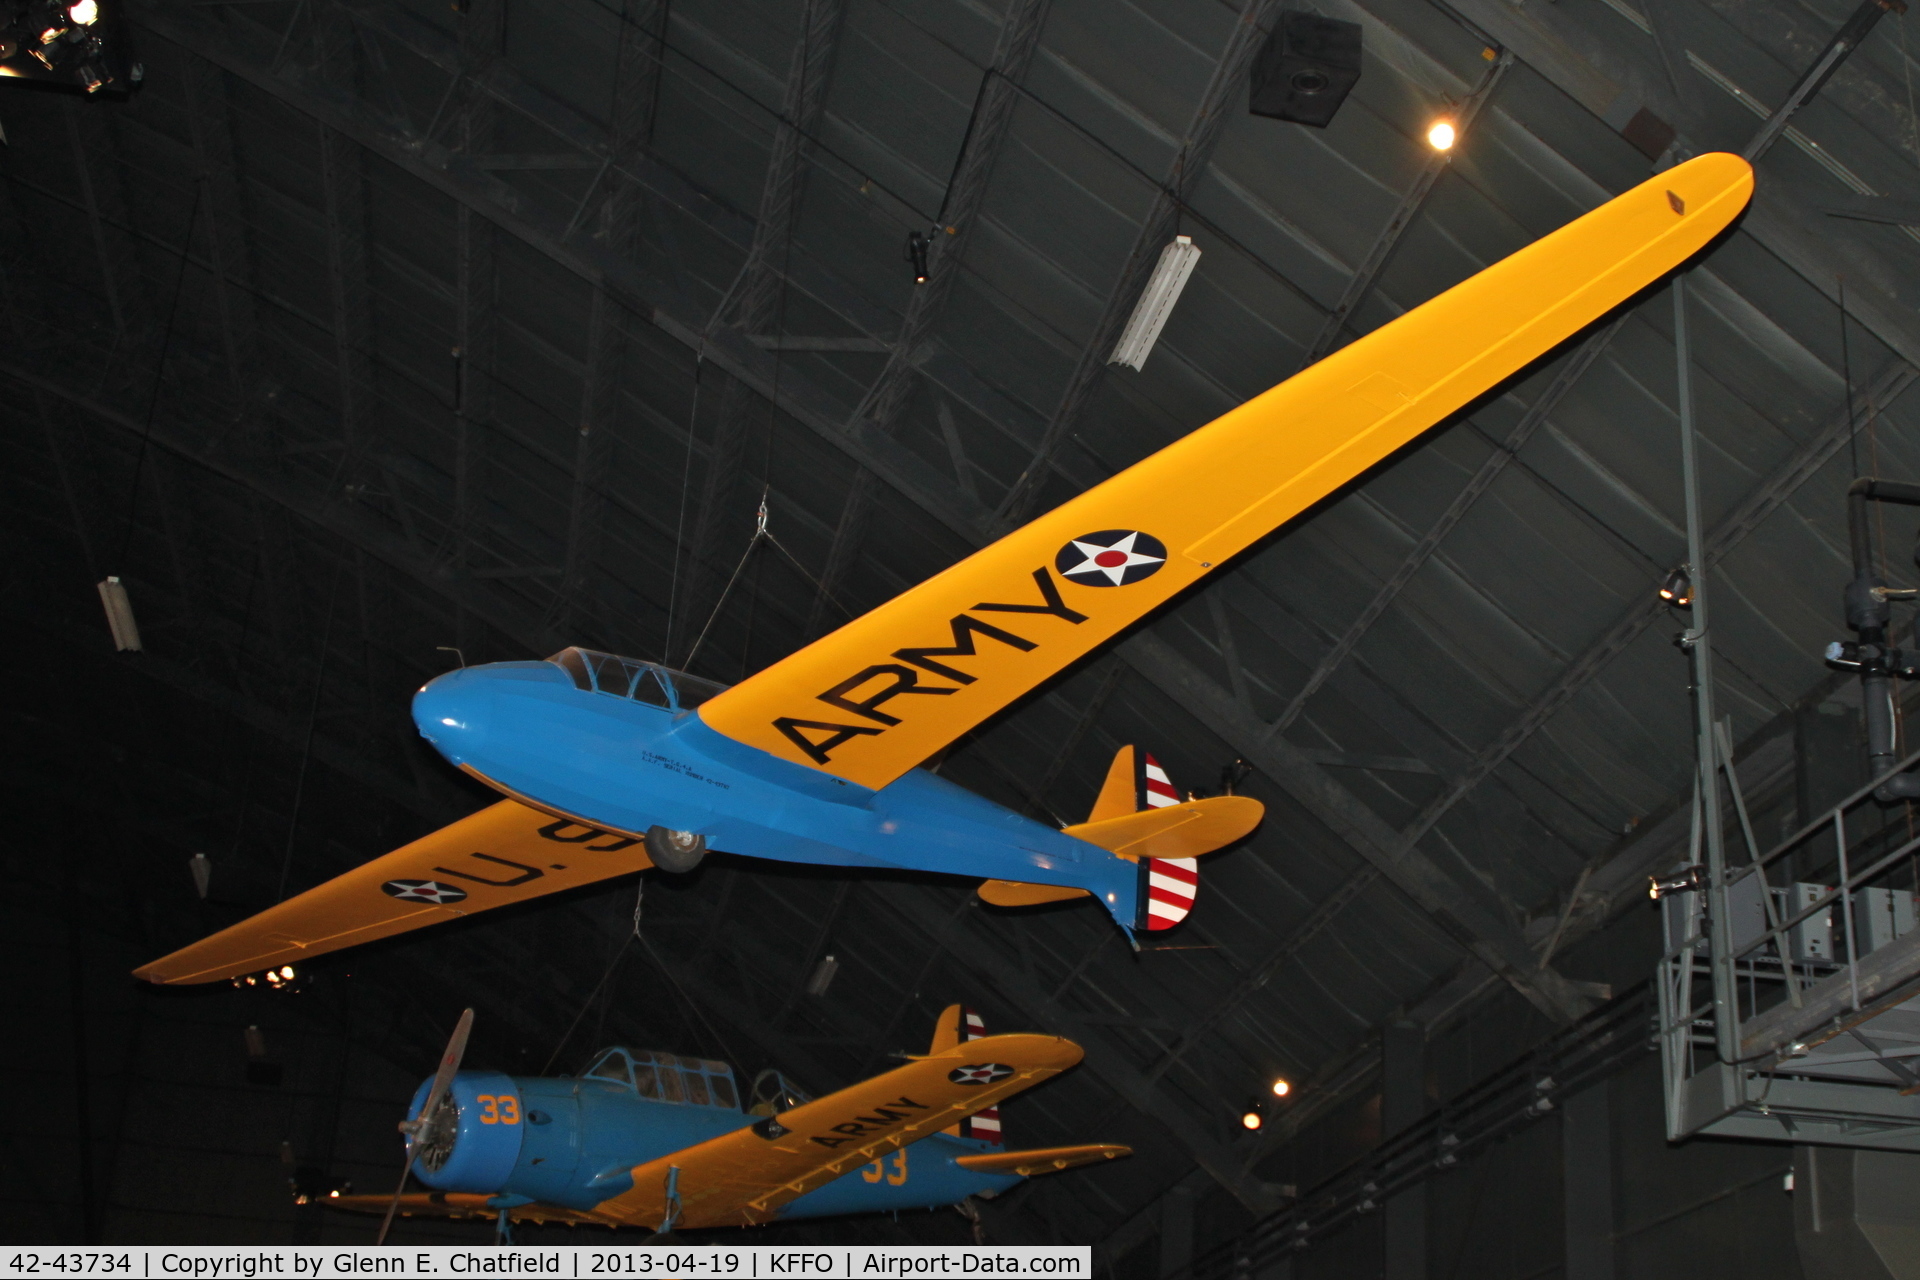 42-43734, 1942 Laister-Kauffman TG-4 C/N Not found 42-43734, In the WWII gallery